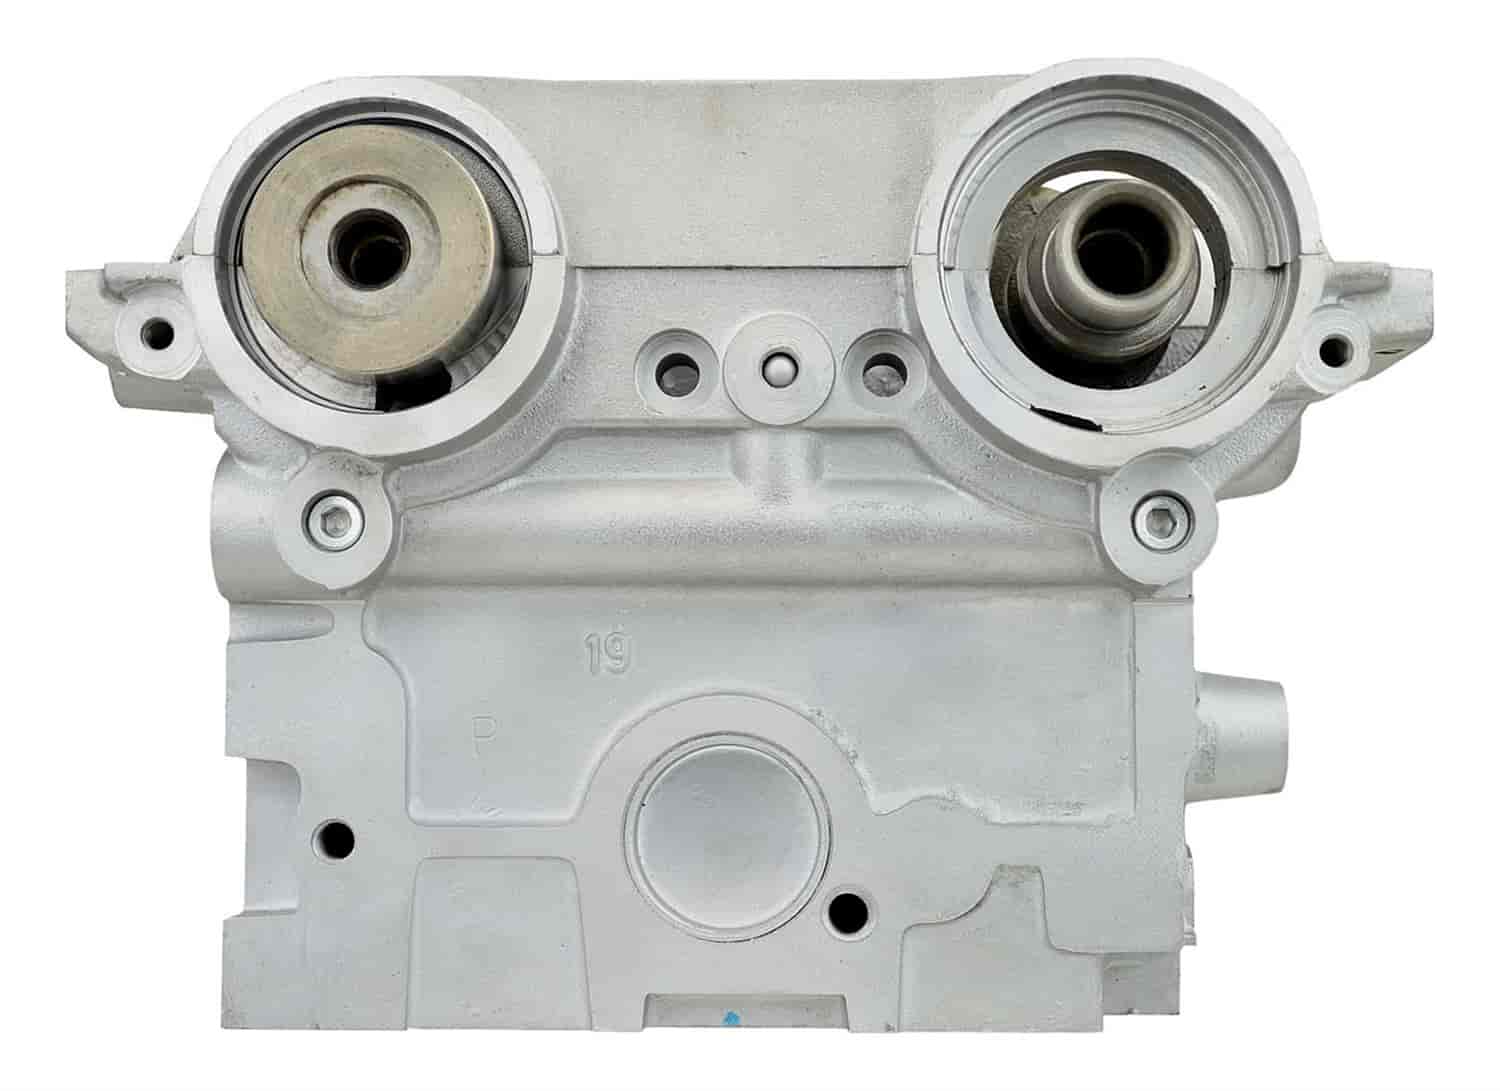 Remanufactured Cylinder Head for 2000-2002 Ford/Mercury with 2.0L